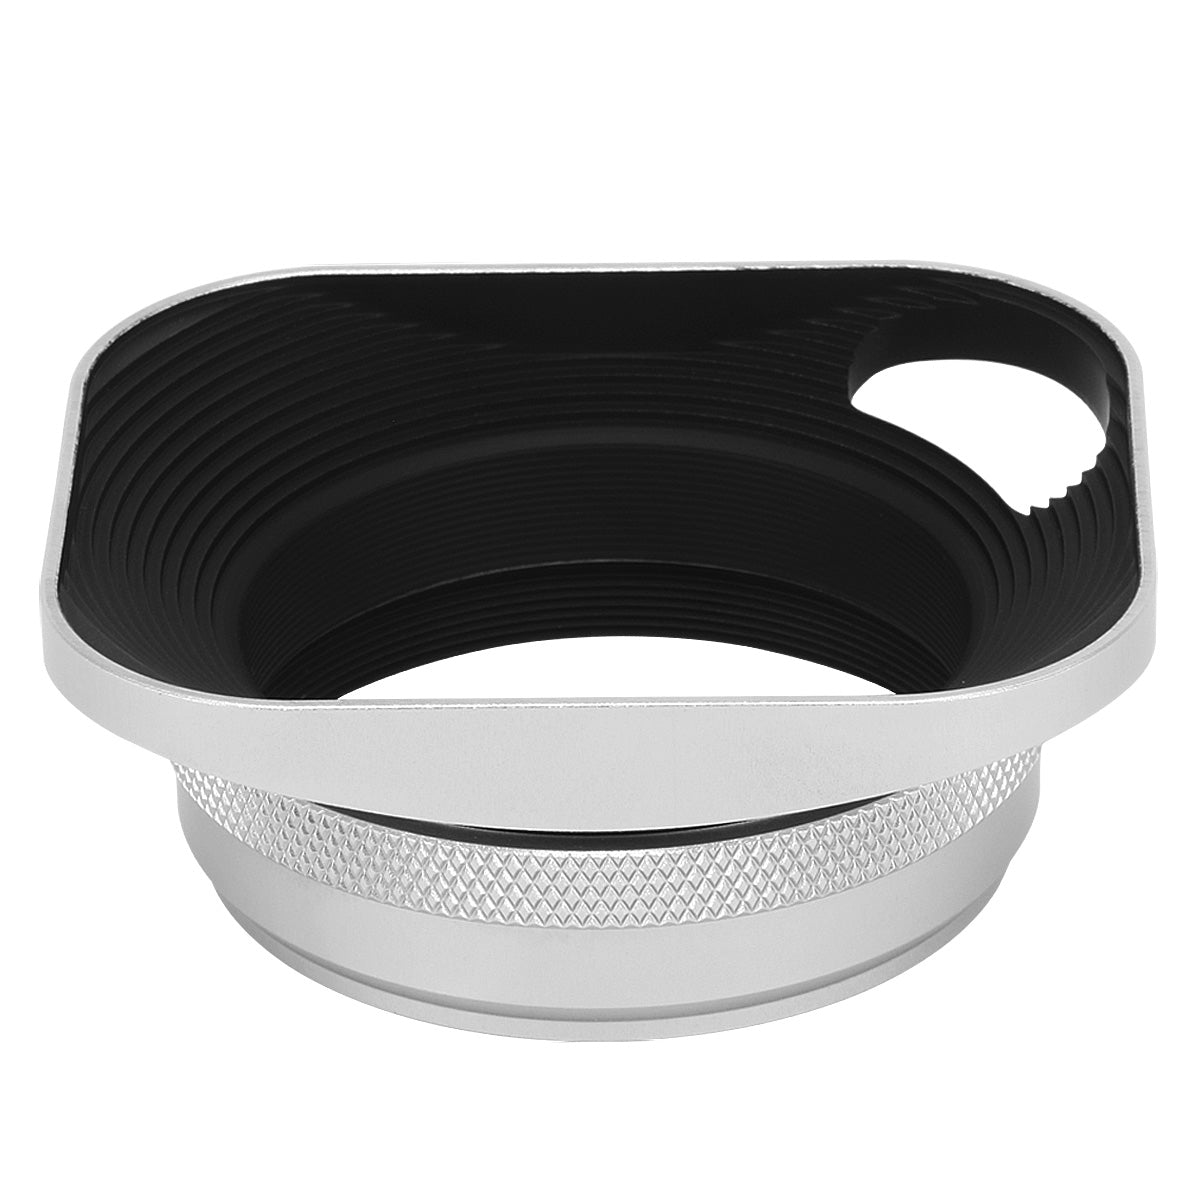 Haoge LH-ES3 Square Metal Lens Hood Hollow Out Designed with 49mm Adapter Ring with Cap for Fujifilm Fuji FinePix X100 X100S X100T X70 X100F X100V Camera Replaces LH-X100 AR-X100 LH-X70 Silver